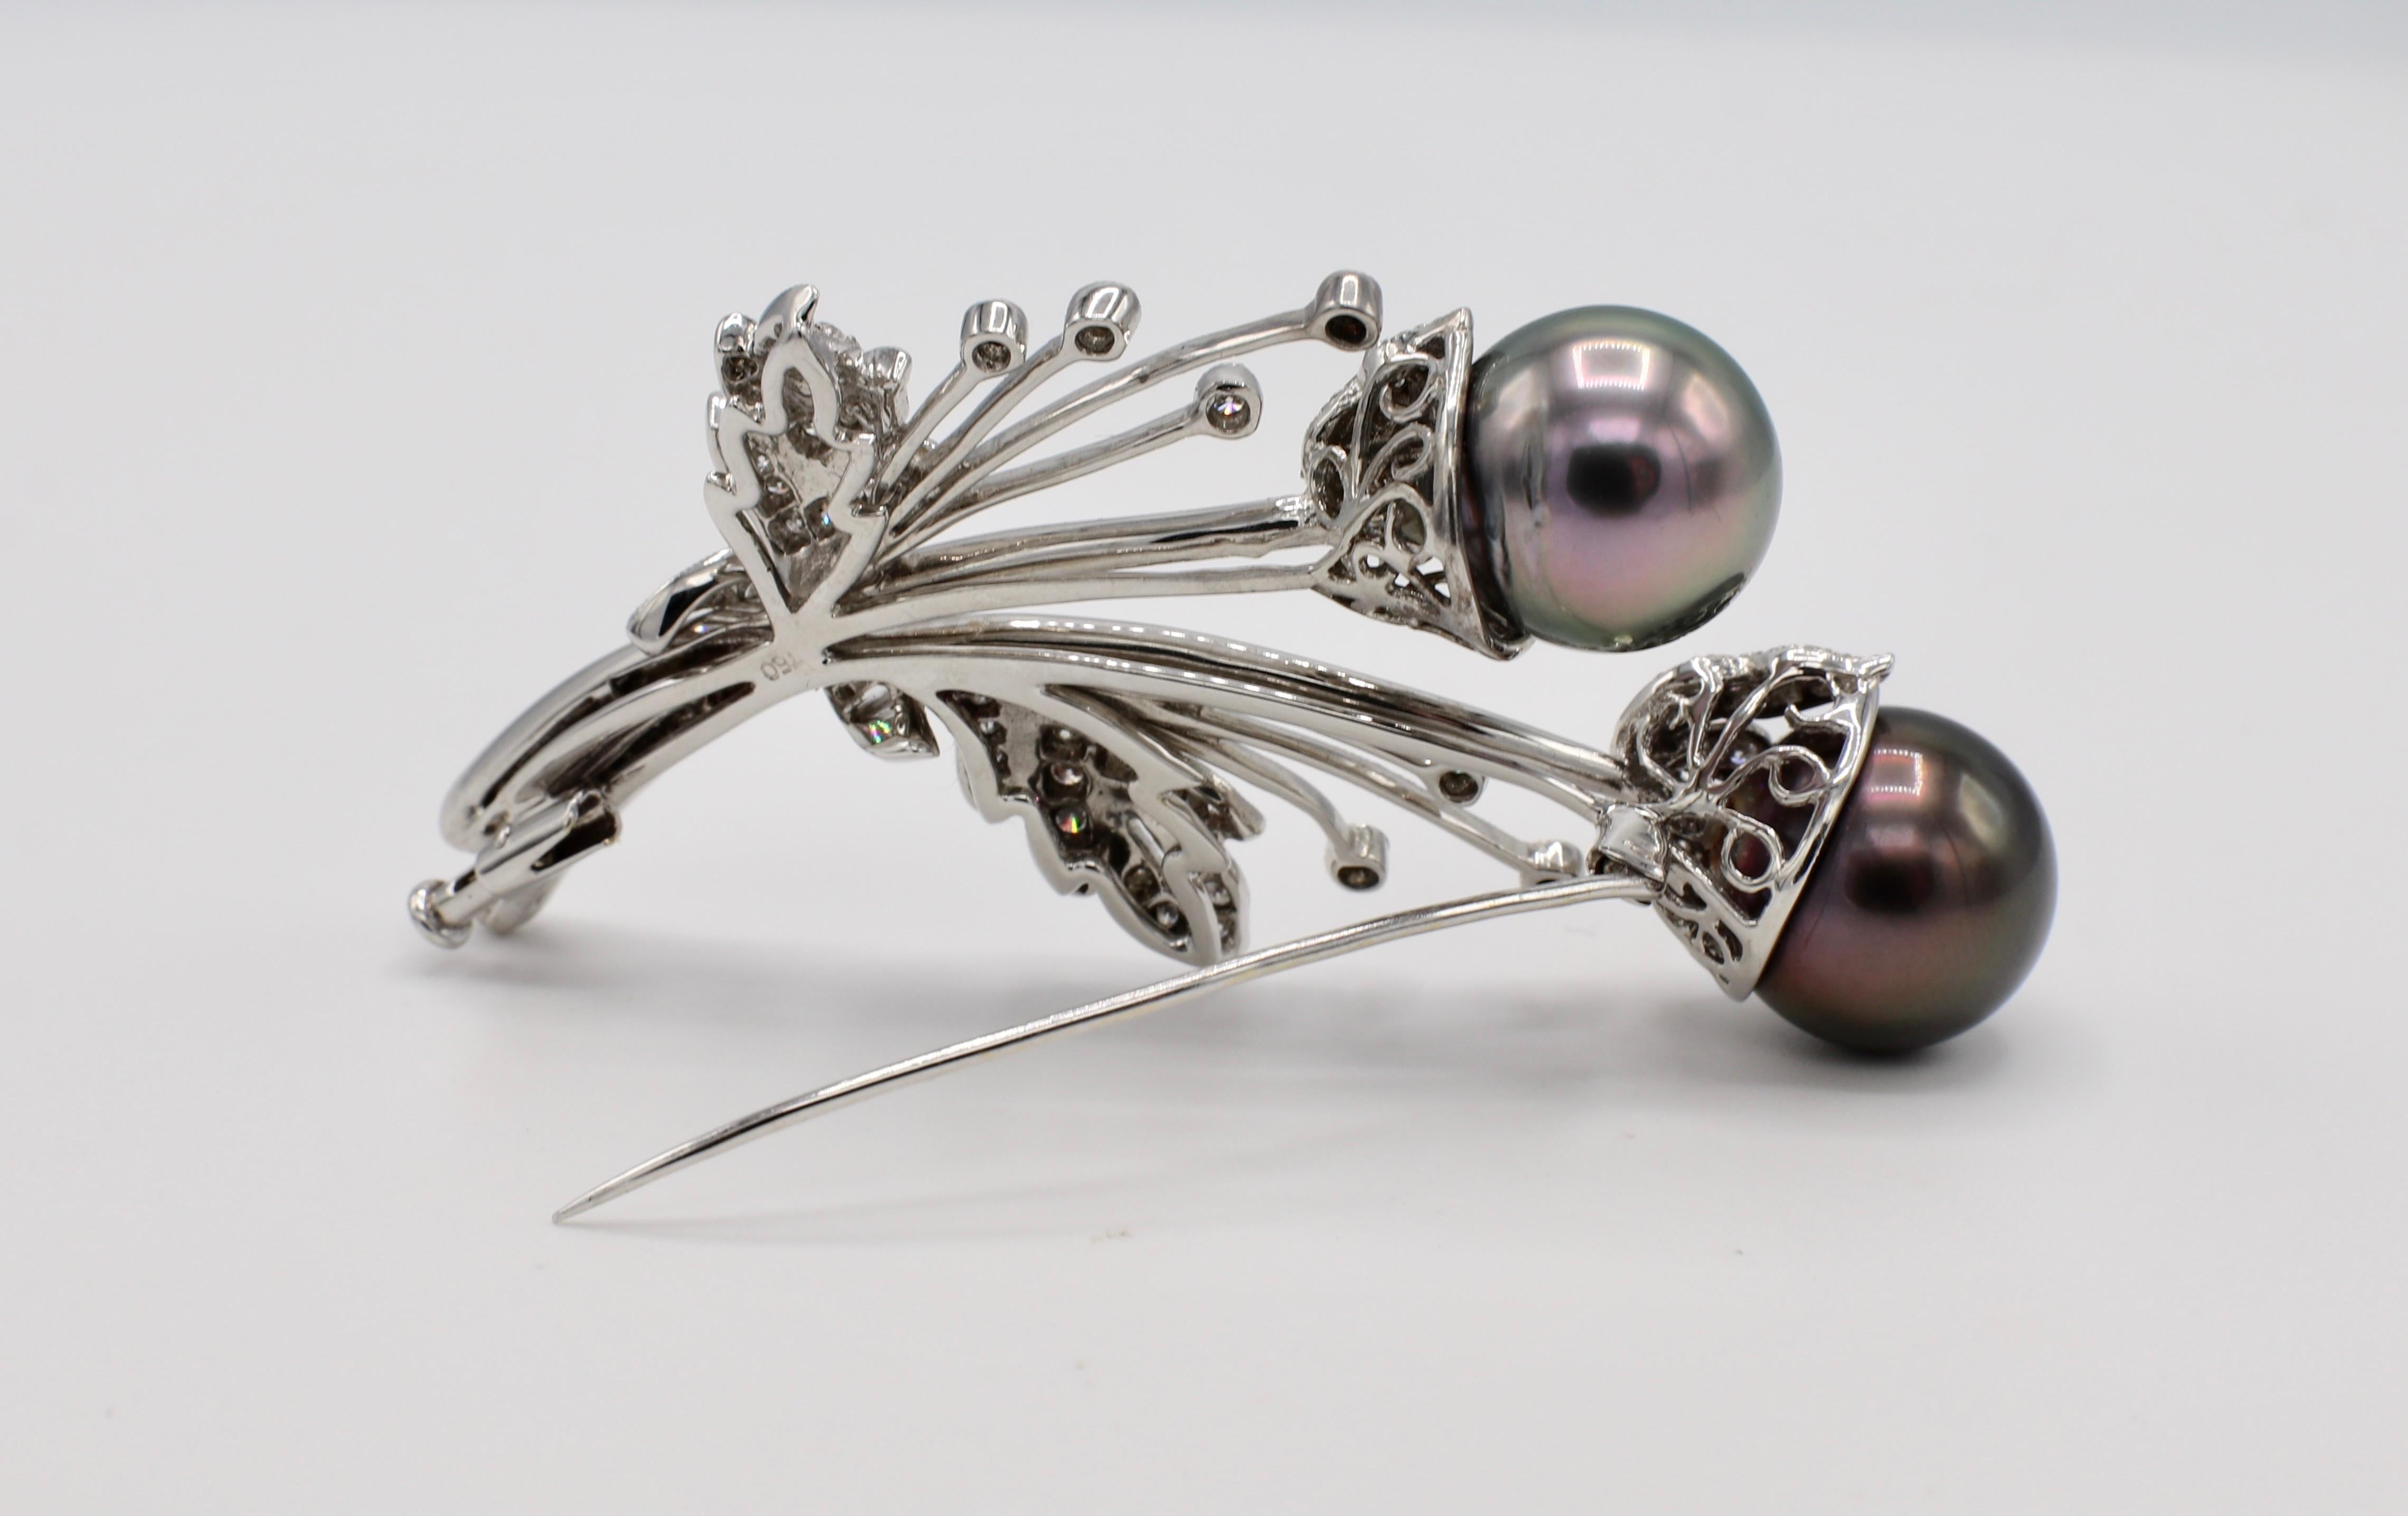 18 Karat White Gold Diamond & Tahitian Pearl Brooch Pin 
Metal: 18k white gold
Weight: 19.8 grams
Diamonds: Round & baguette diamonds, approx. 1 CTW G VS
Pearls are 12-12.5MM
Length: 60MM
Width: 33MM